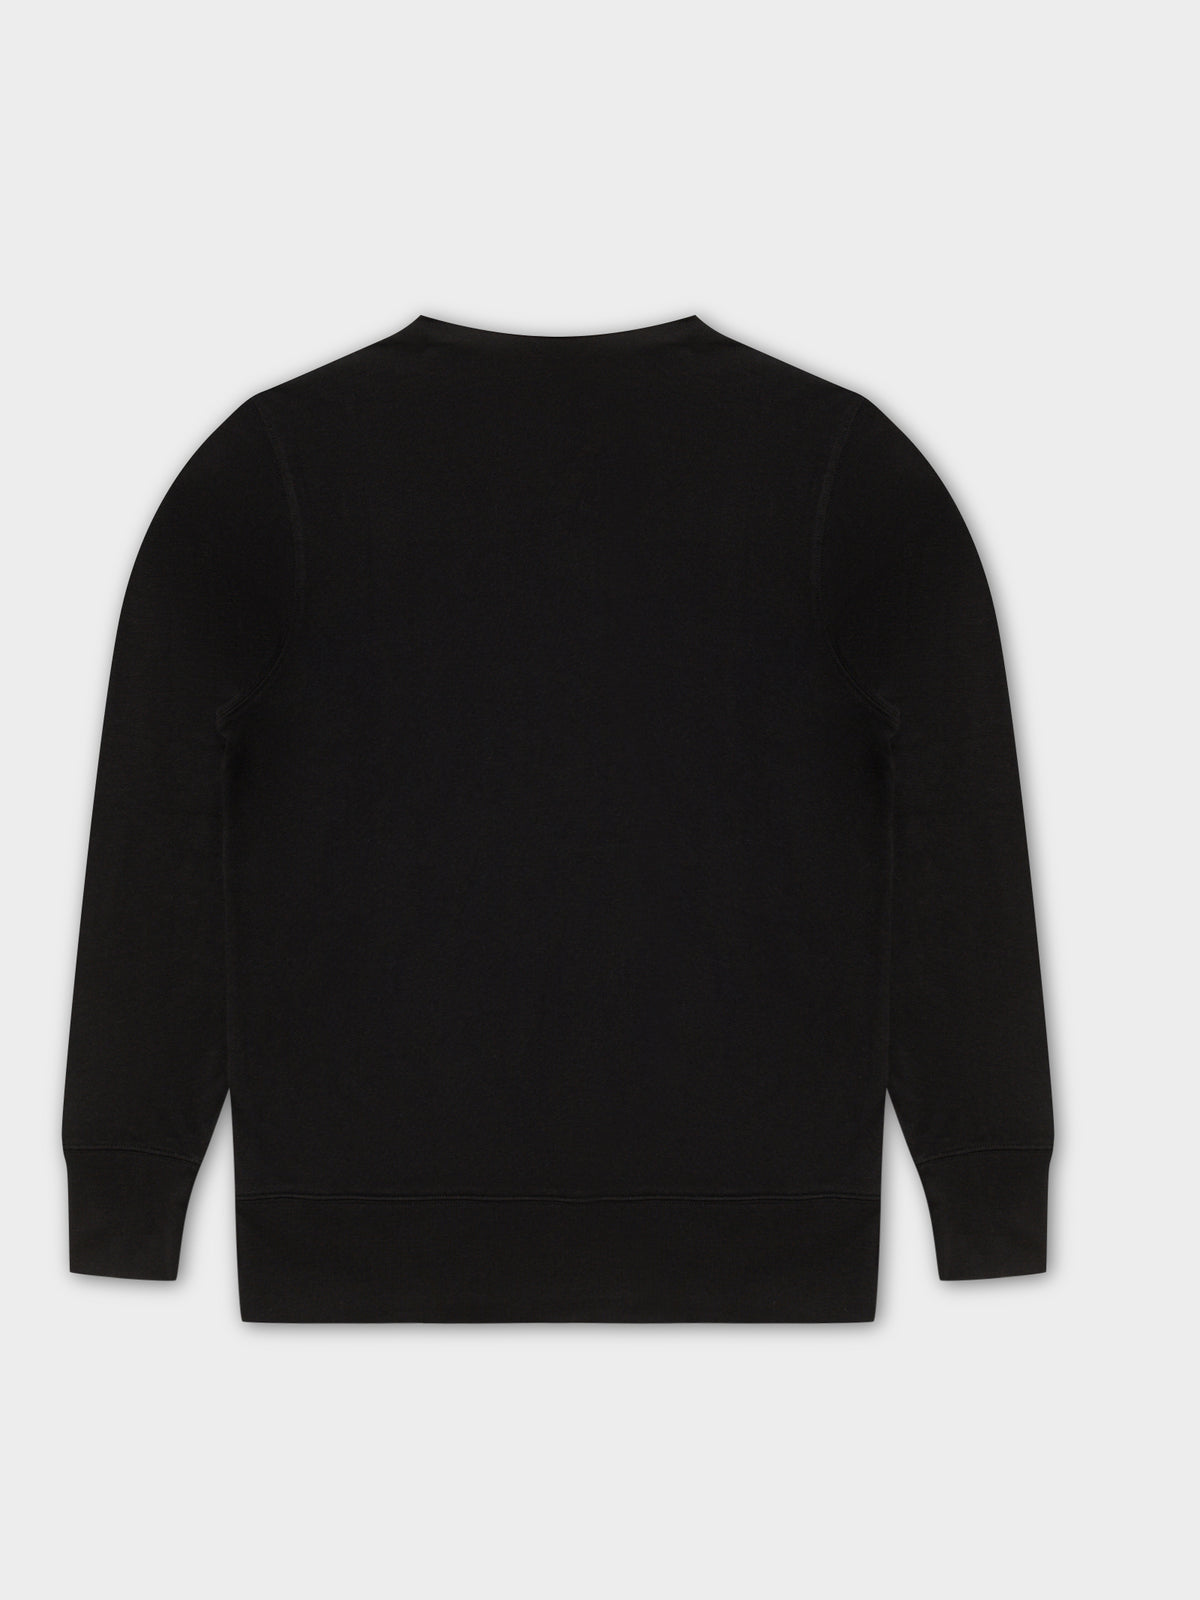 Long Sleeve Rugby Jersey in Black